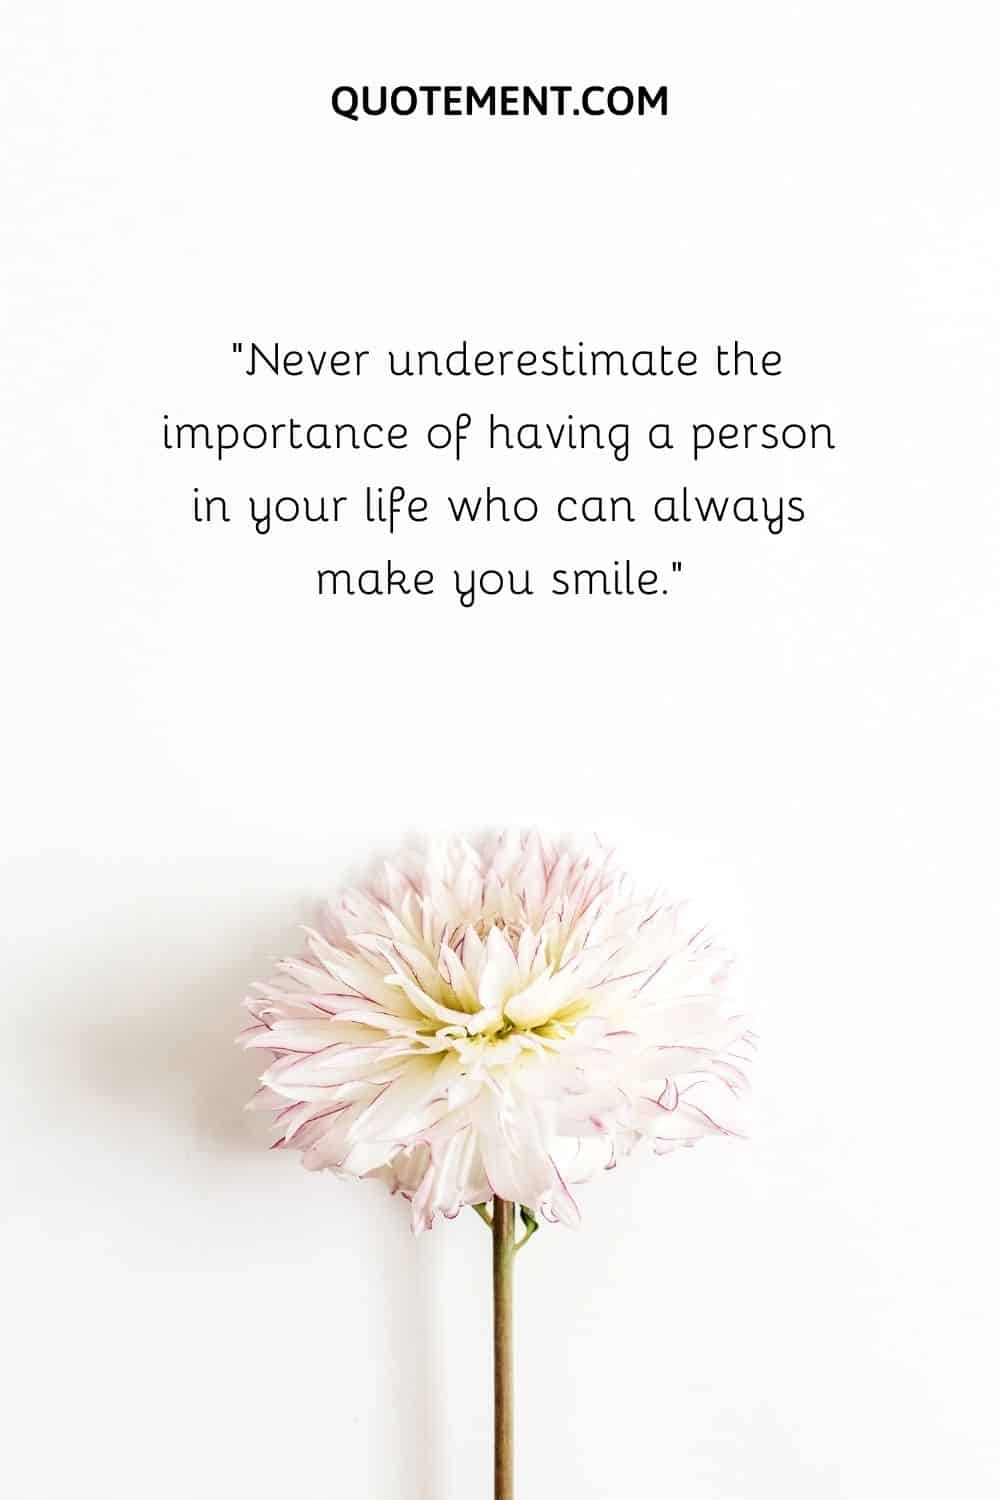 Never underestimate the importance of having a person in your life